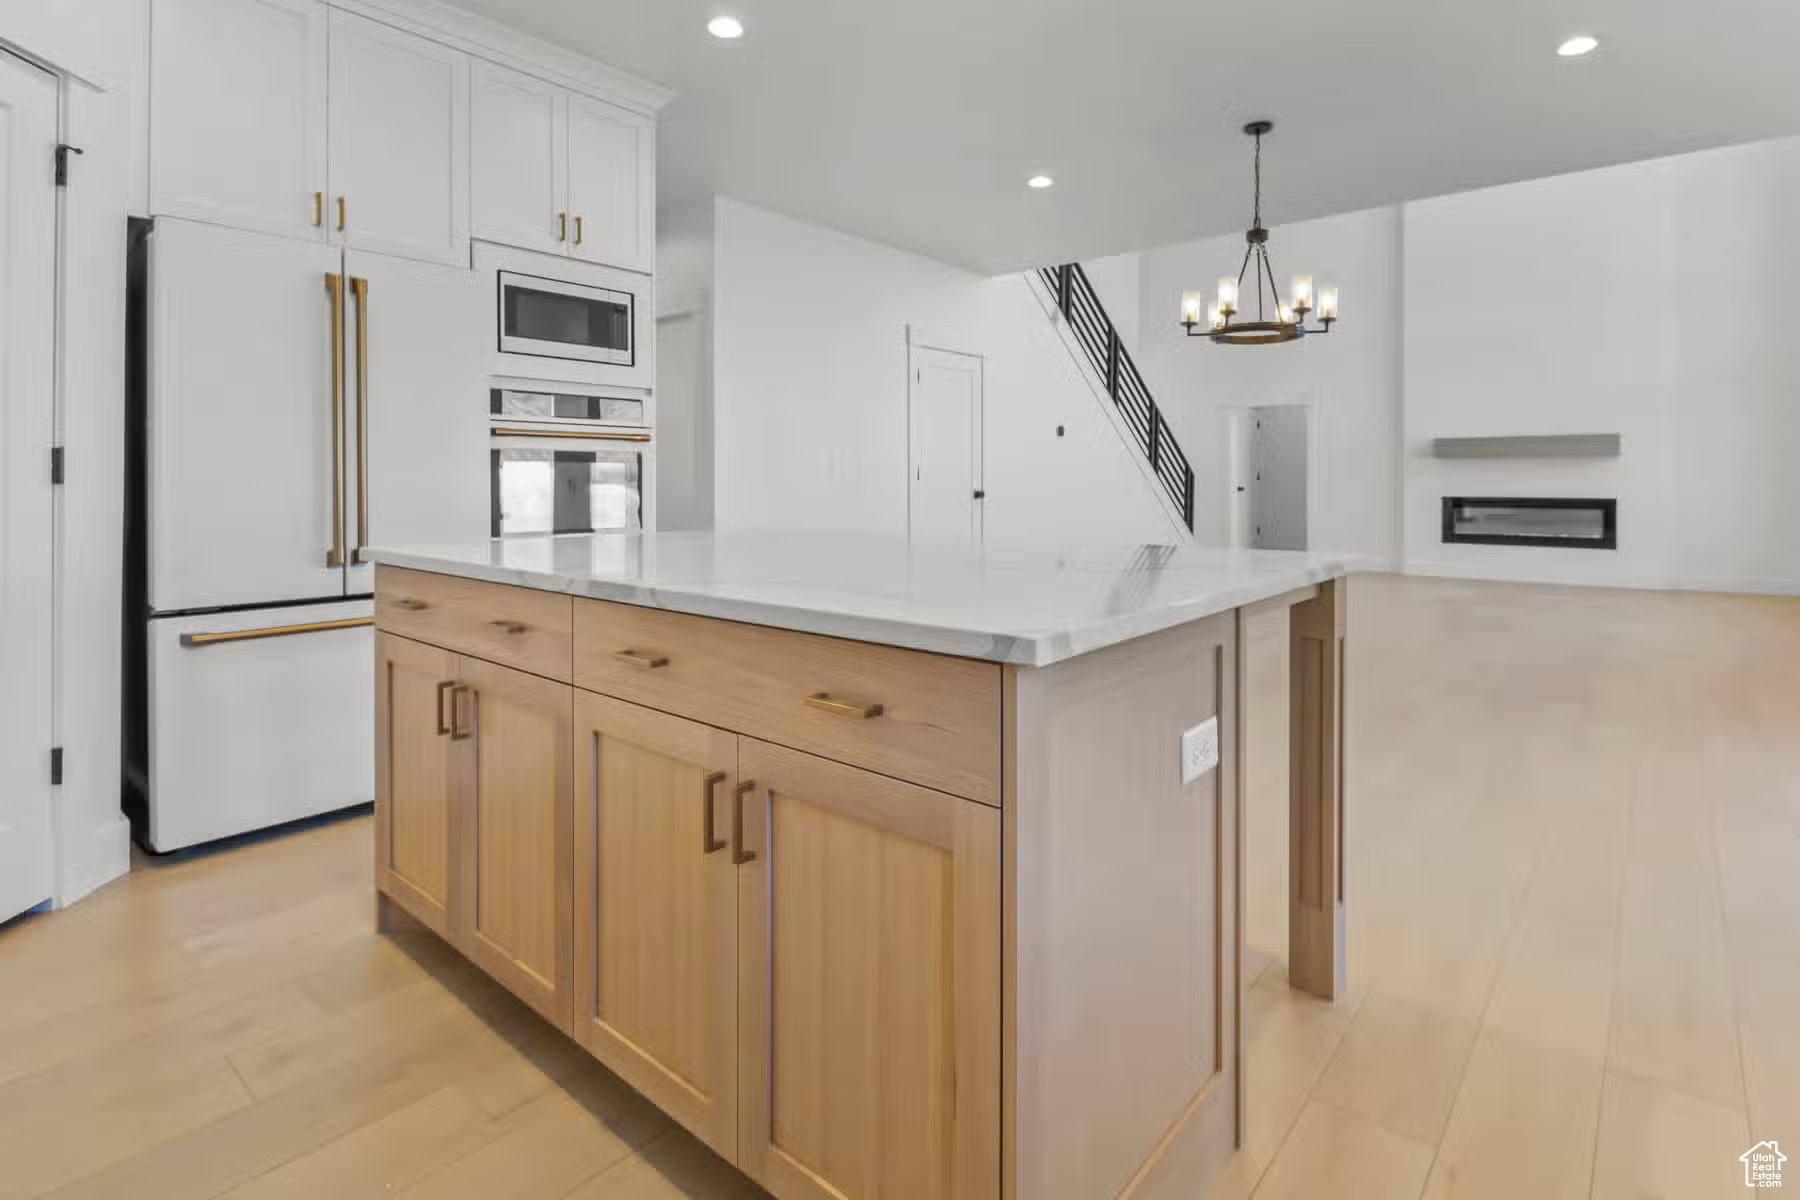 Kitchen featuring light hardwood / wood-style floors, stainless steel microwave, wall oven, white cabinets, and pendant lighting